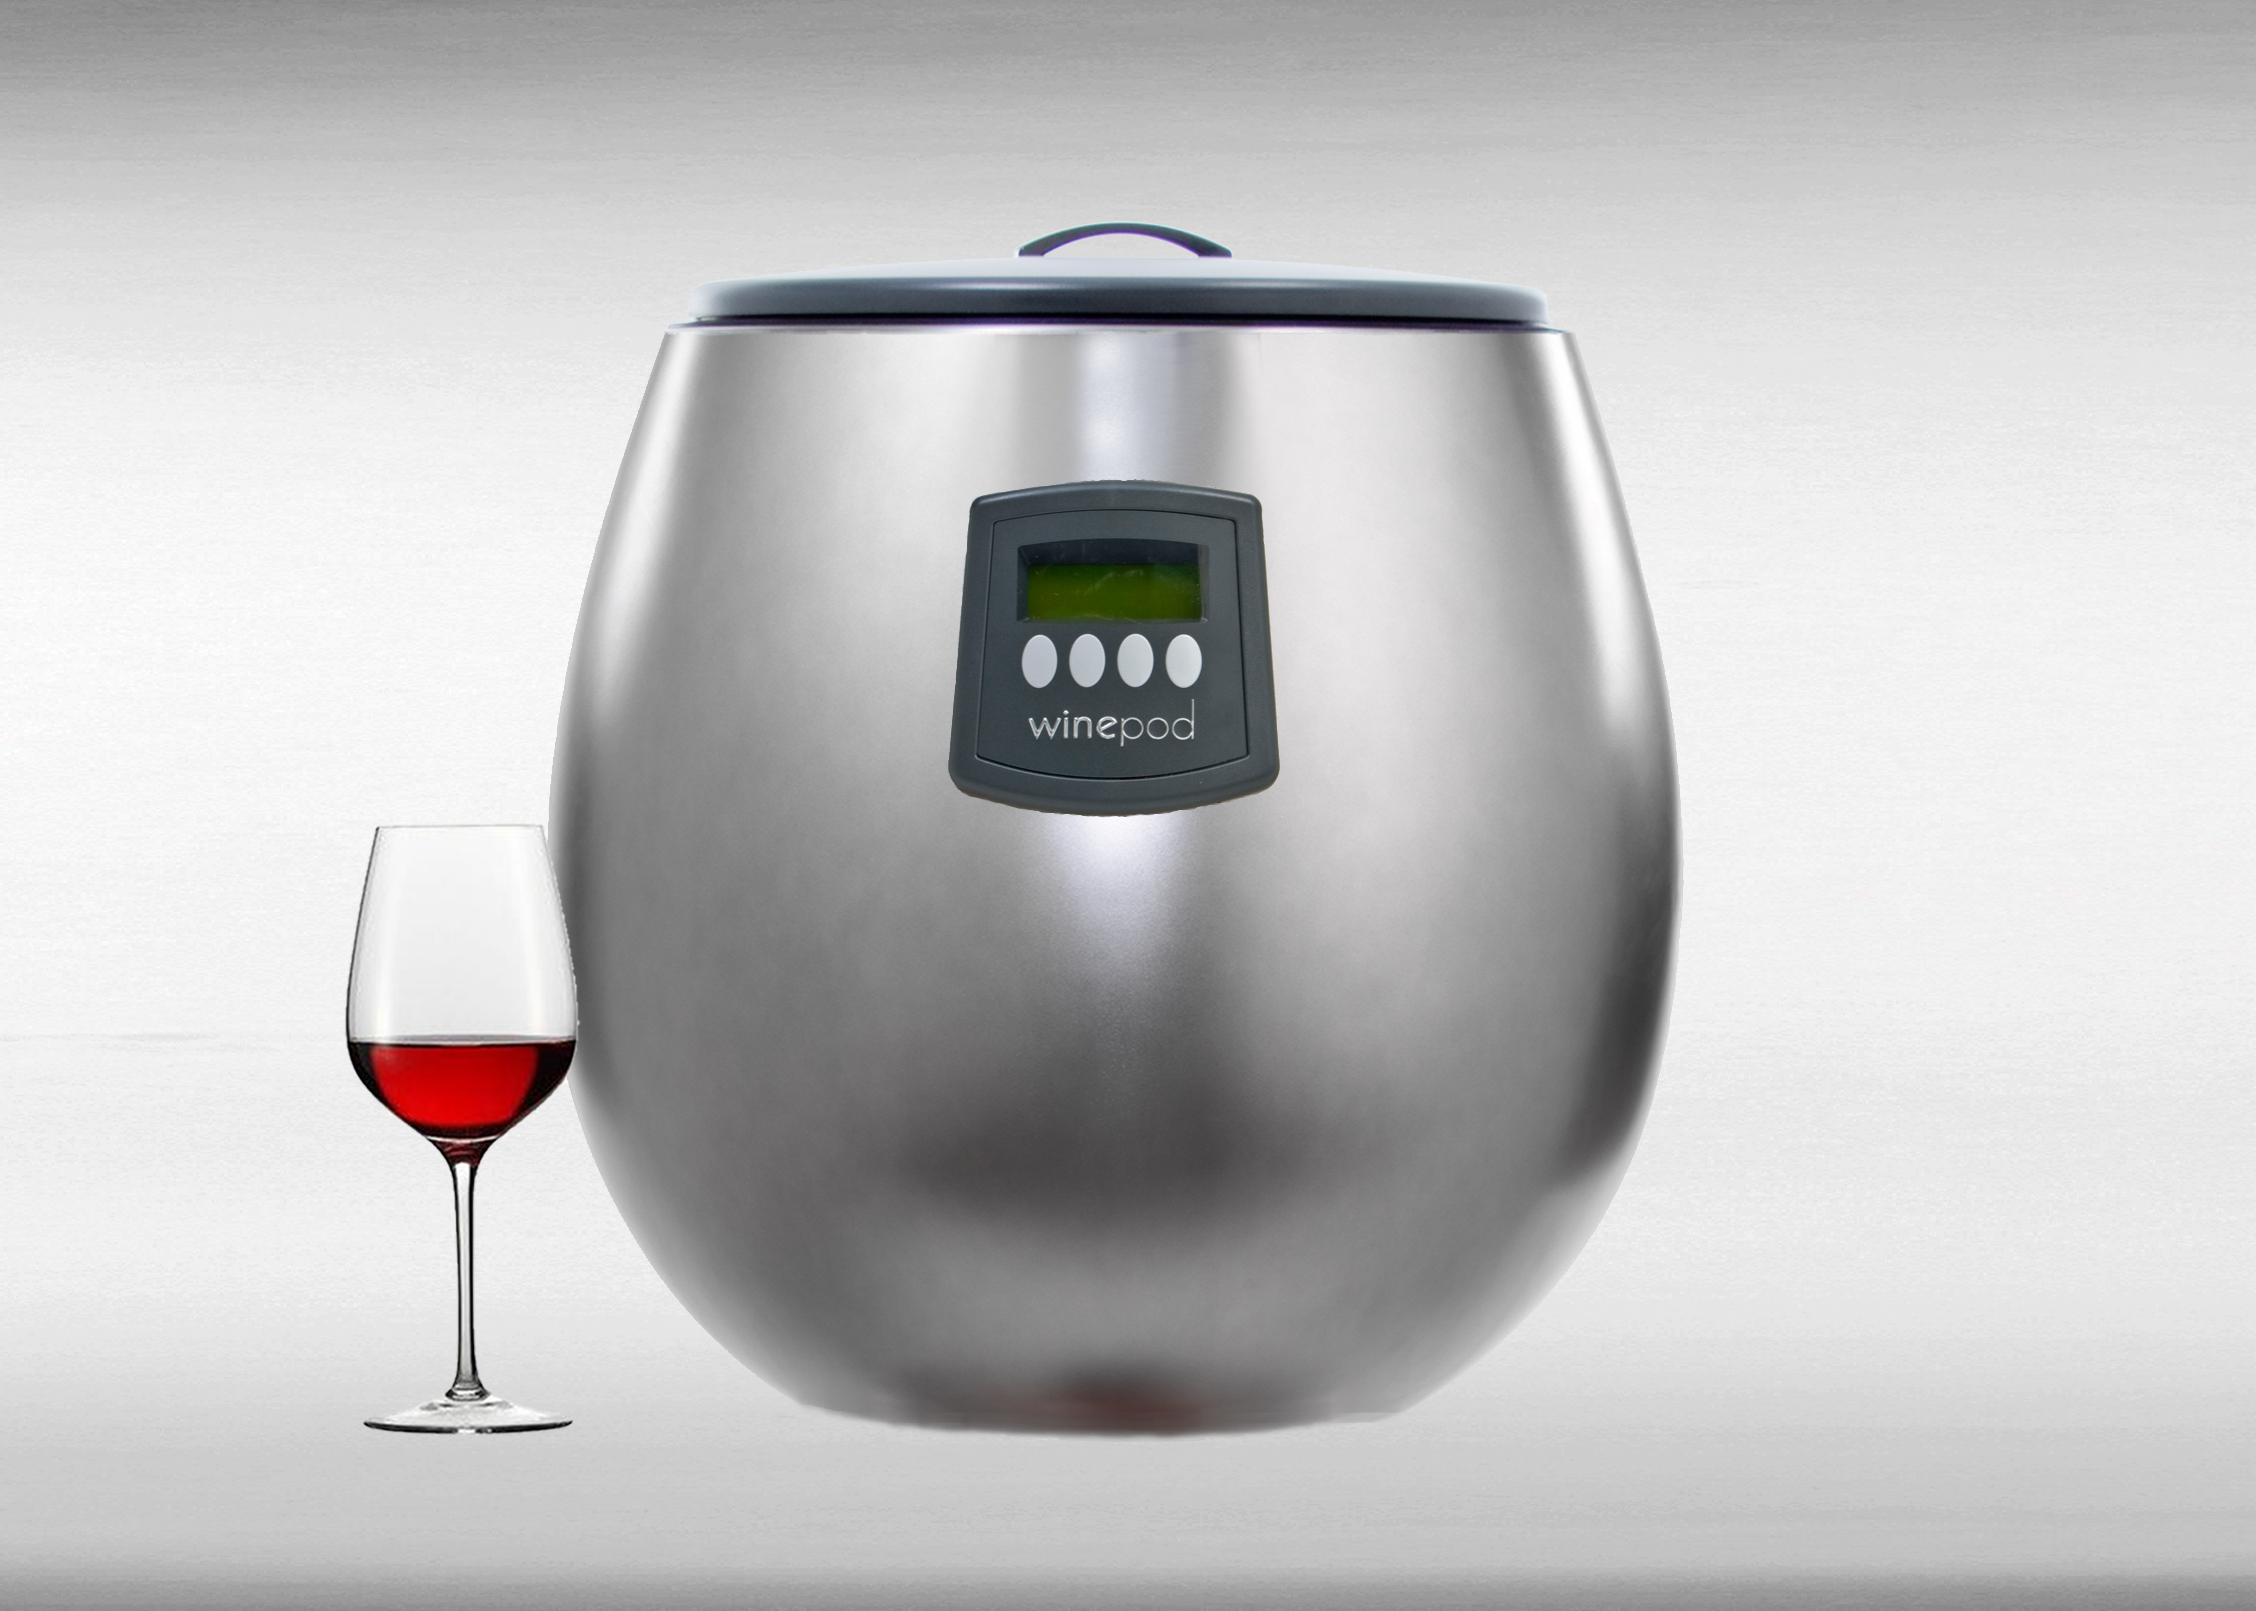 WinePod Mini the most advanced winemaking system in the world